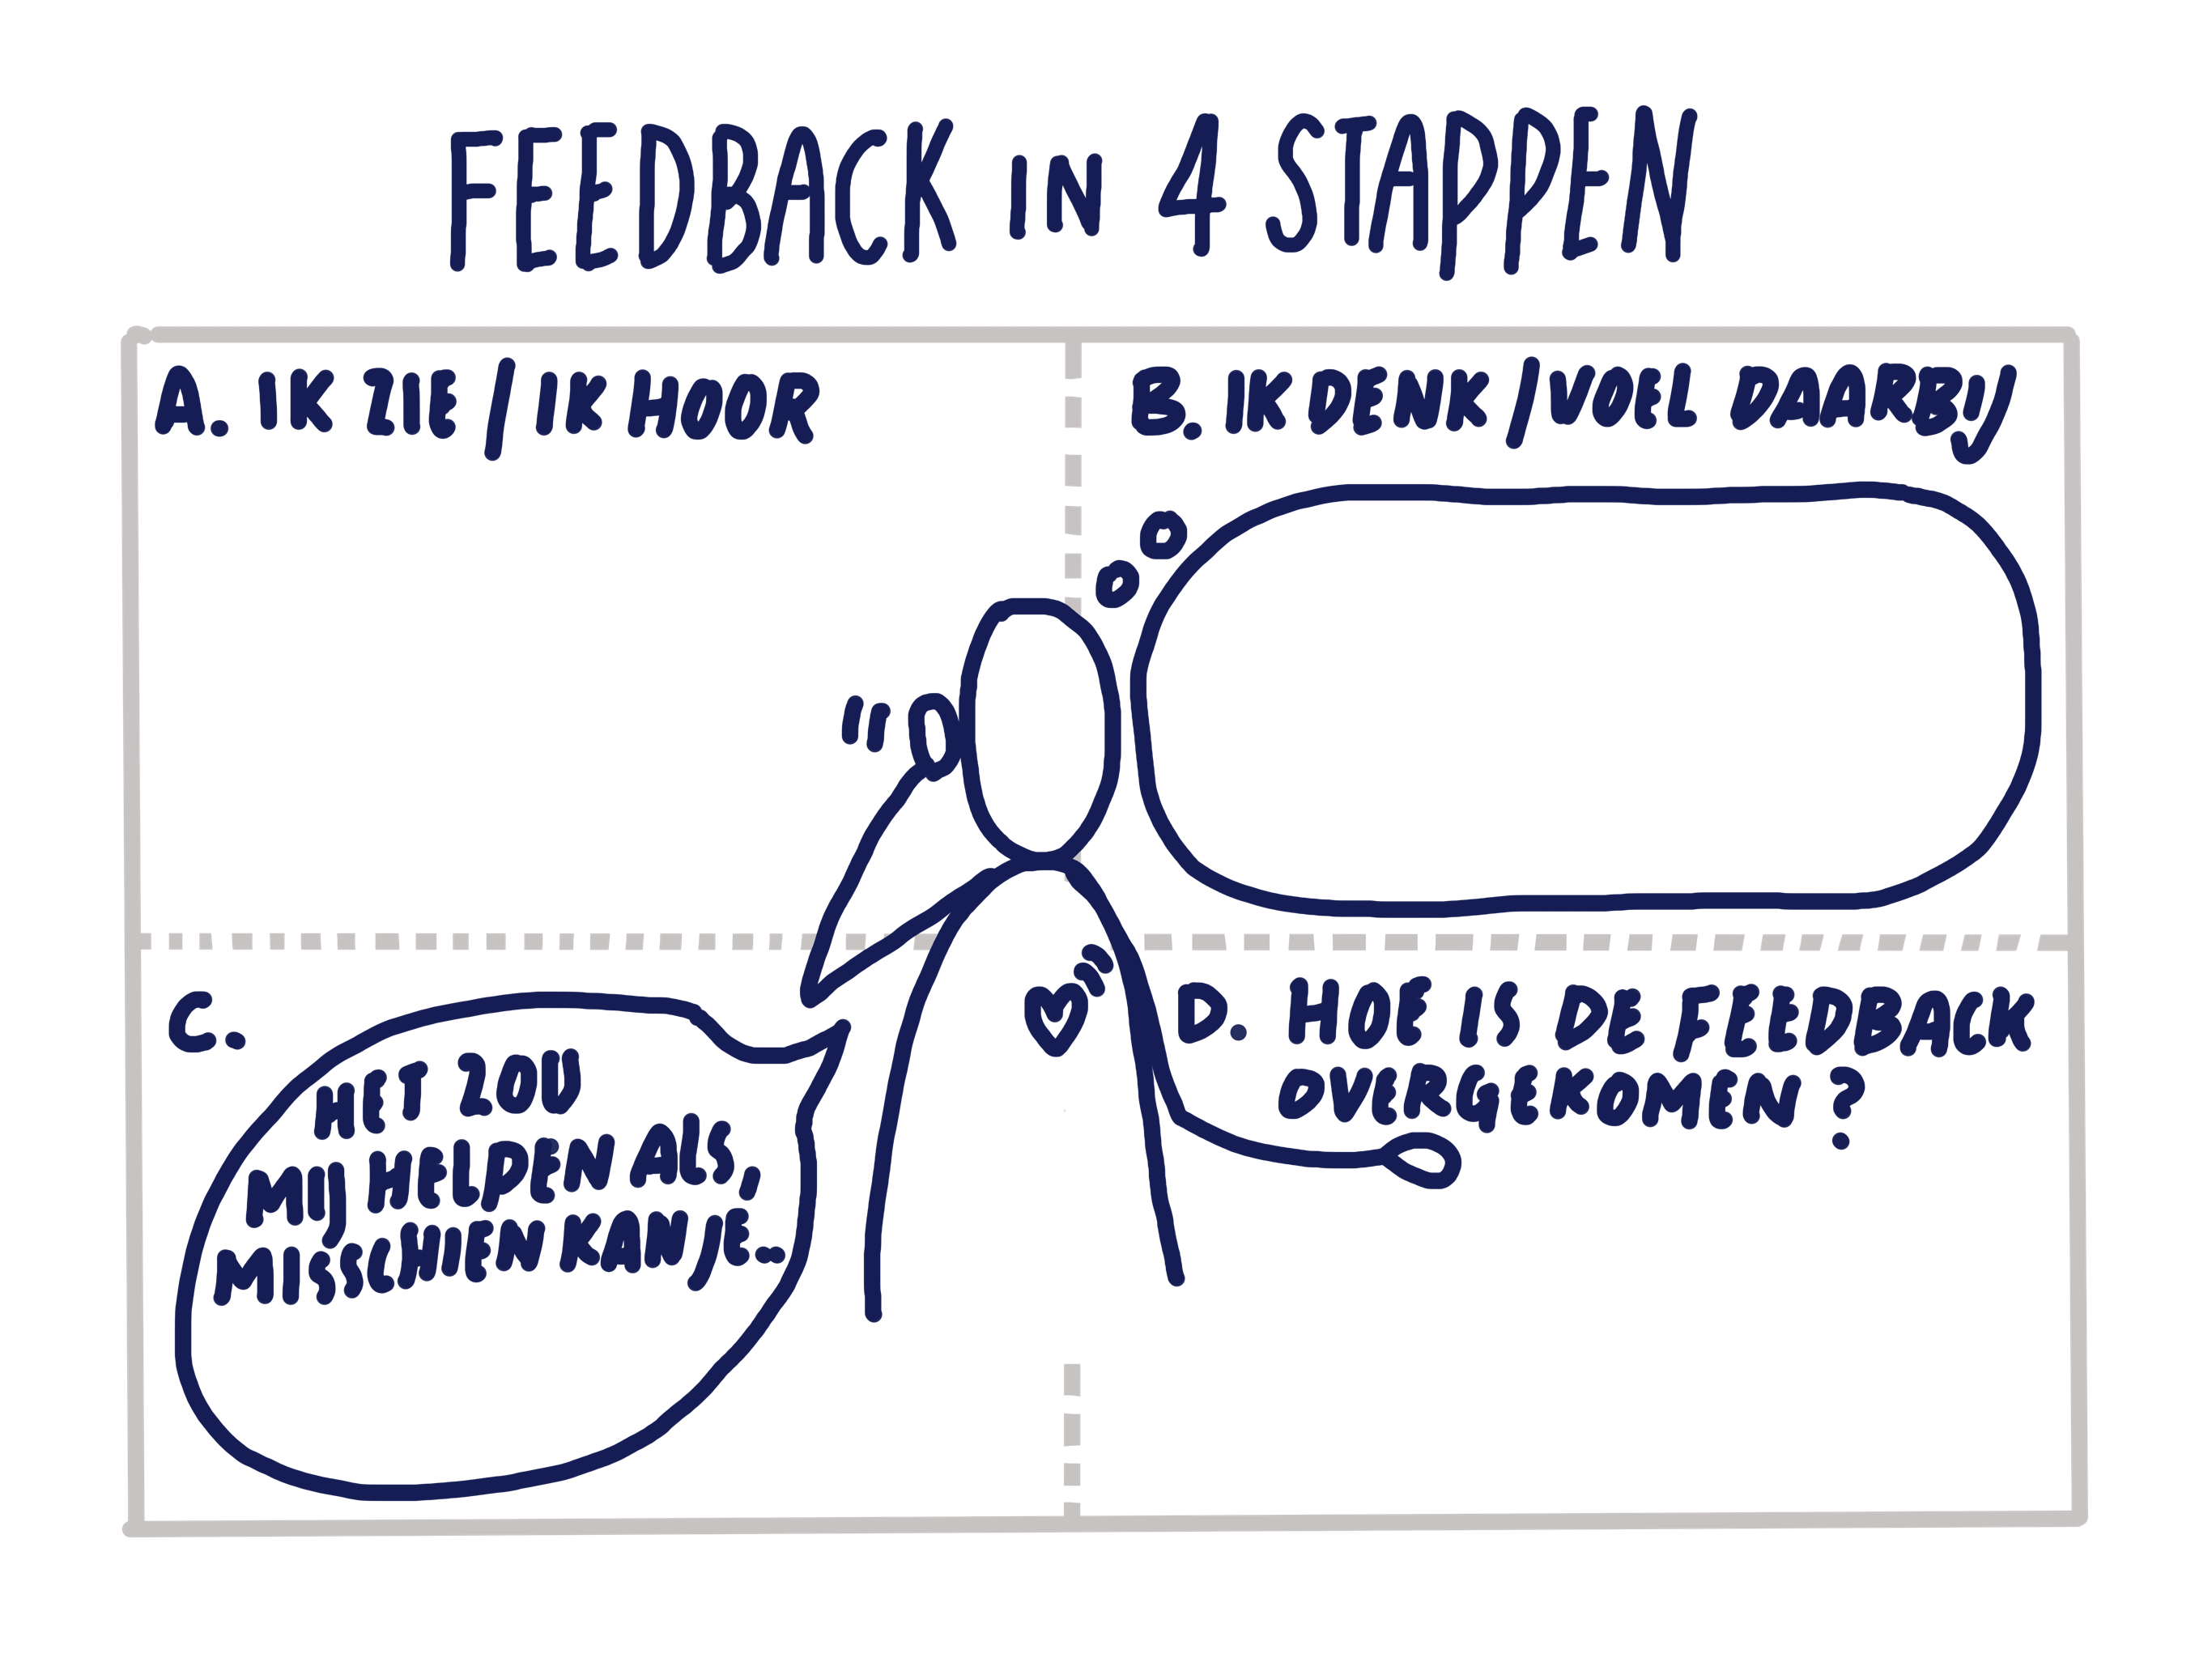 example of Feedback in 4 stappen